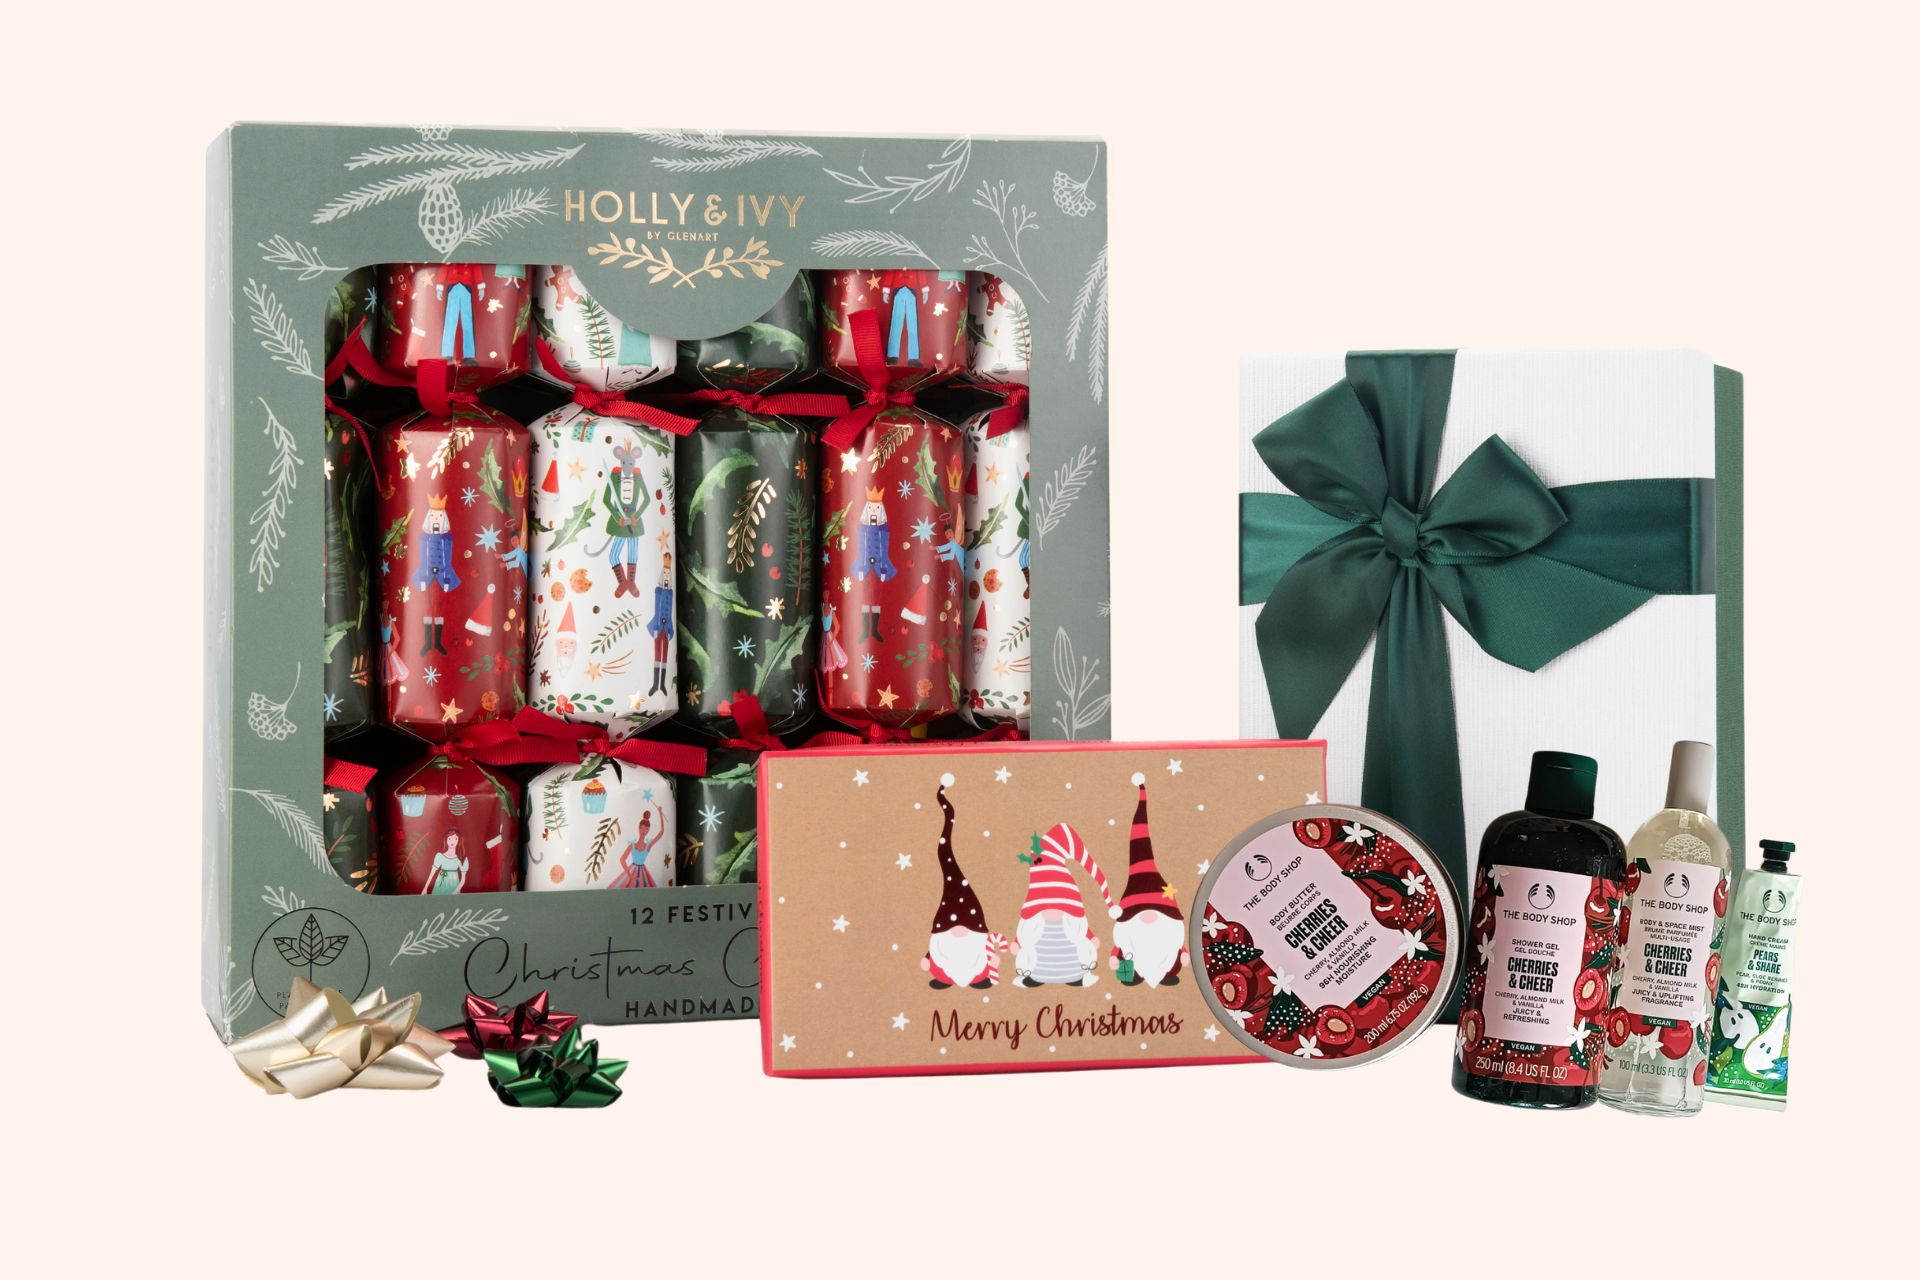 Christmas Shopping with PNA & The Body Shop